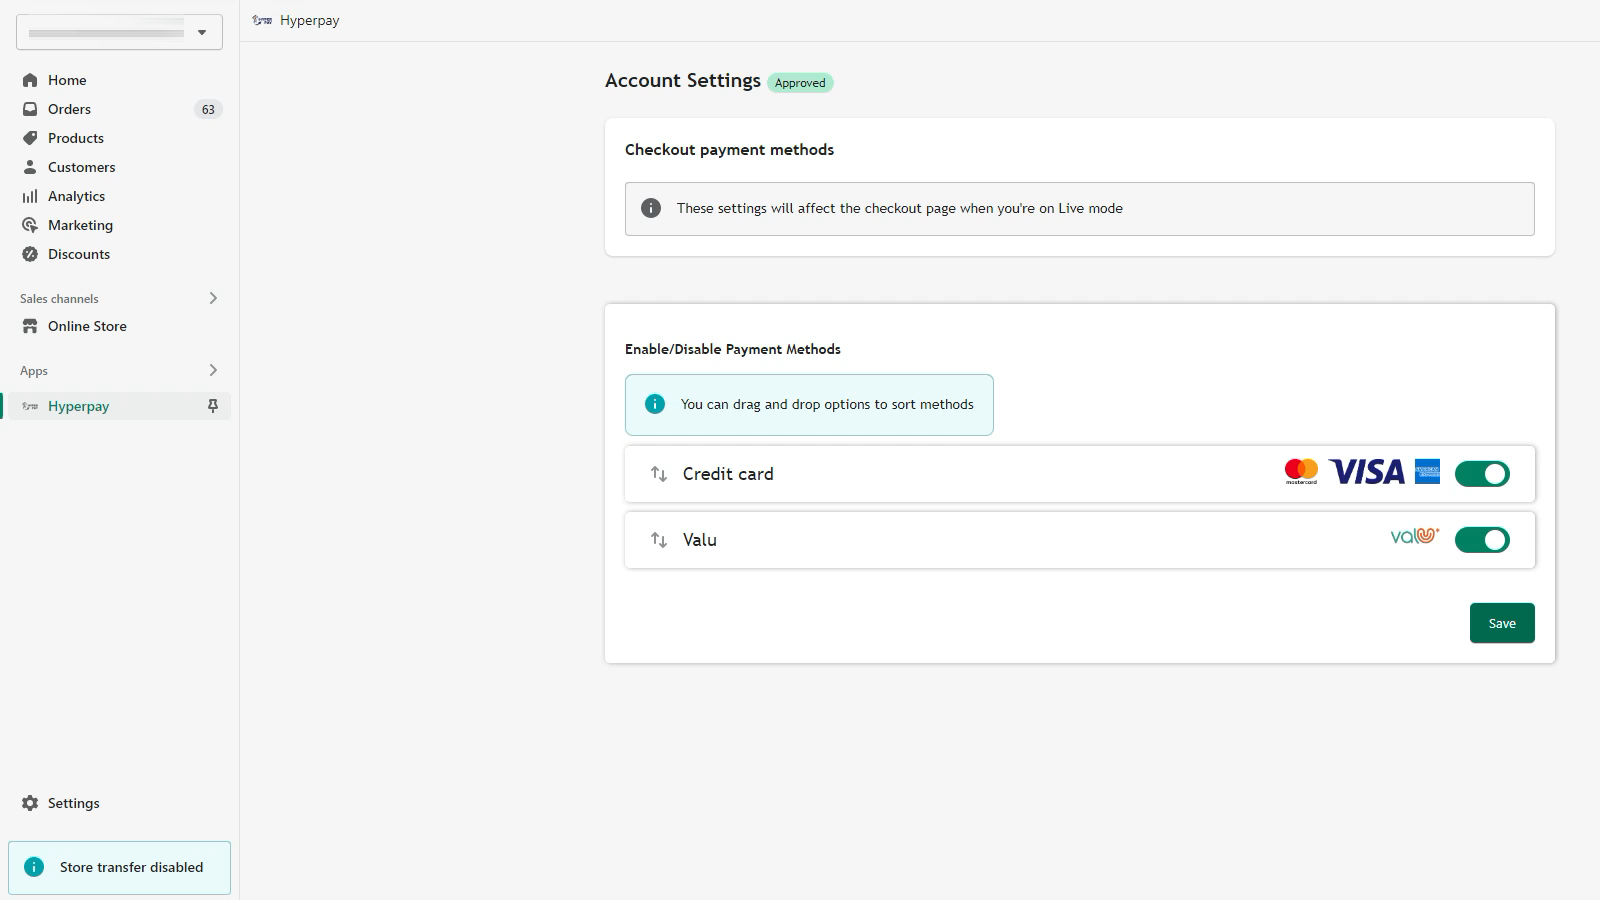 enable \disable payment methods and sorting